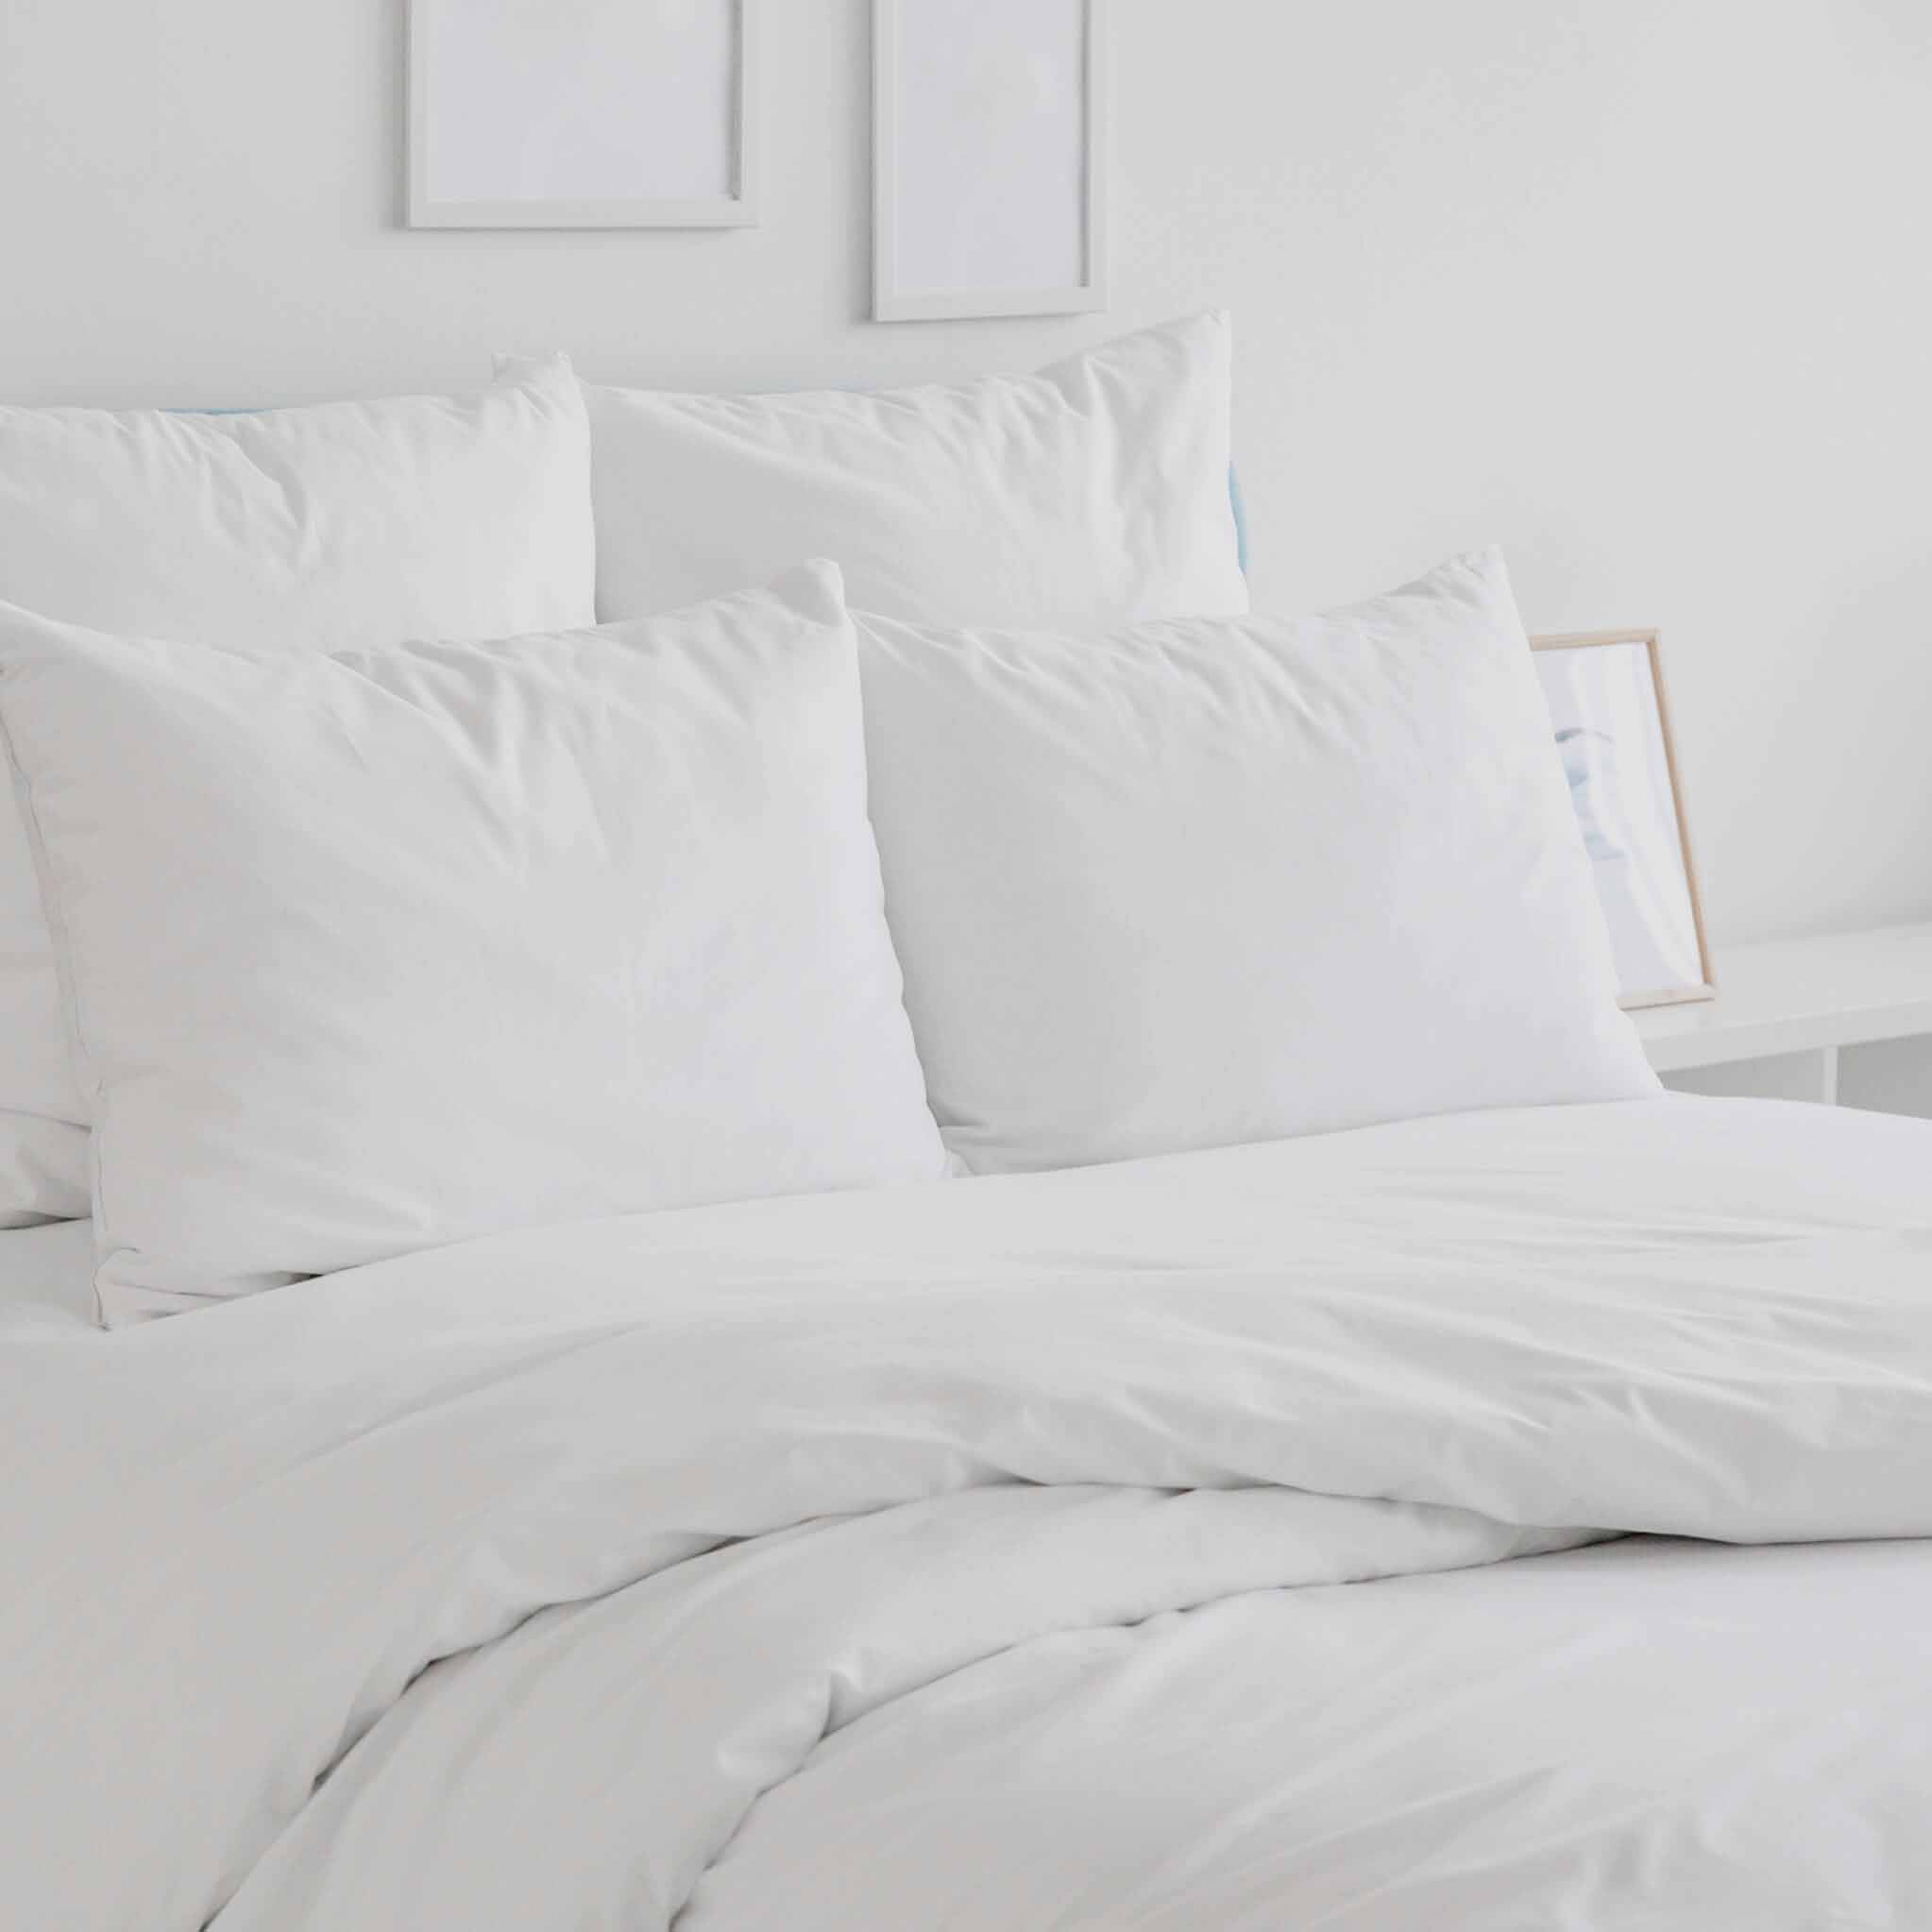 Allergy Bedding - Organic cotton and natural cotton sheet sets